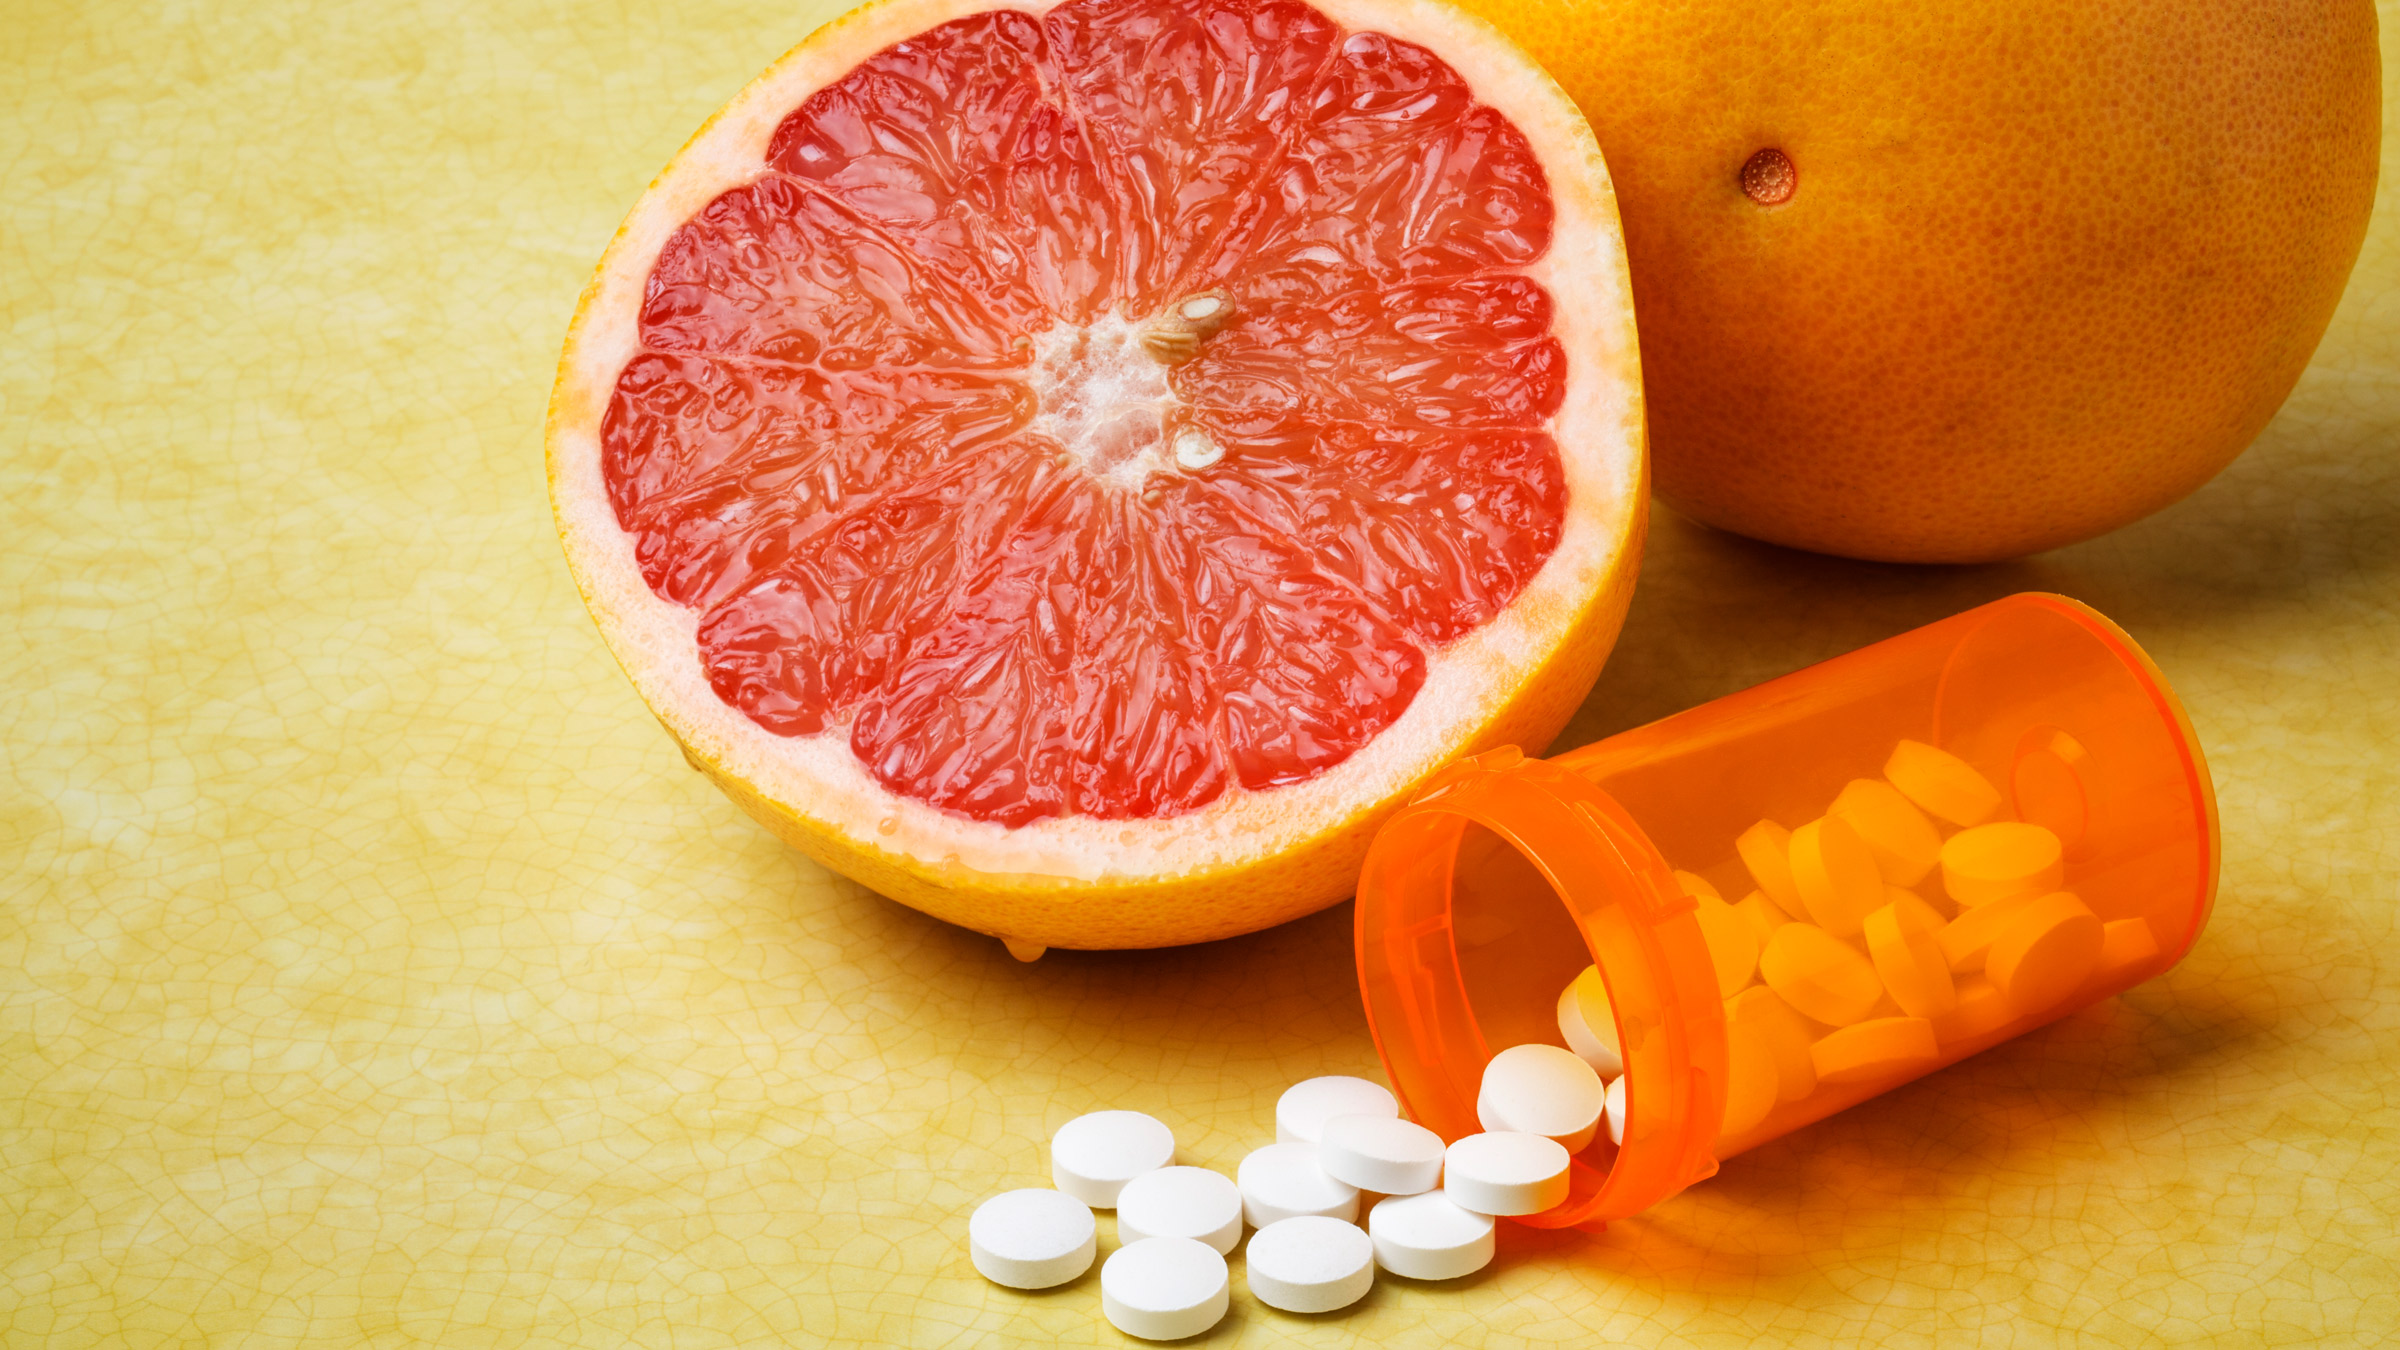 statins and grapefruit juice interactions